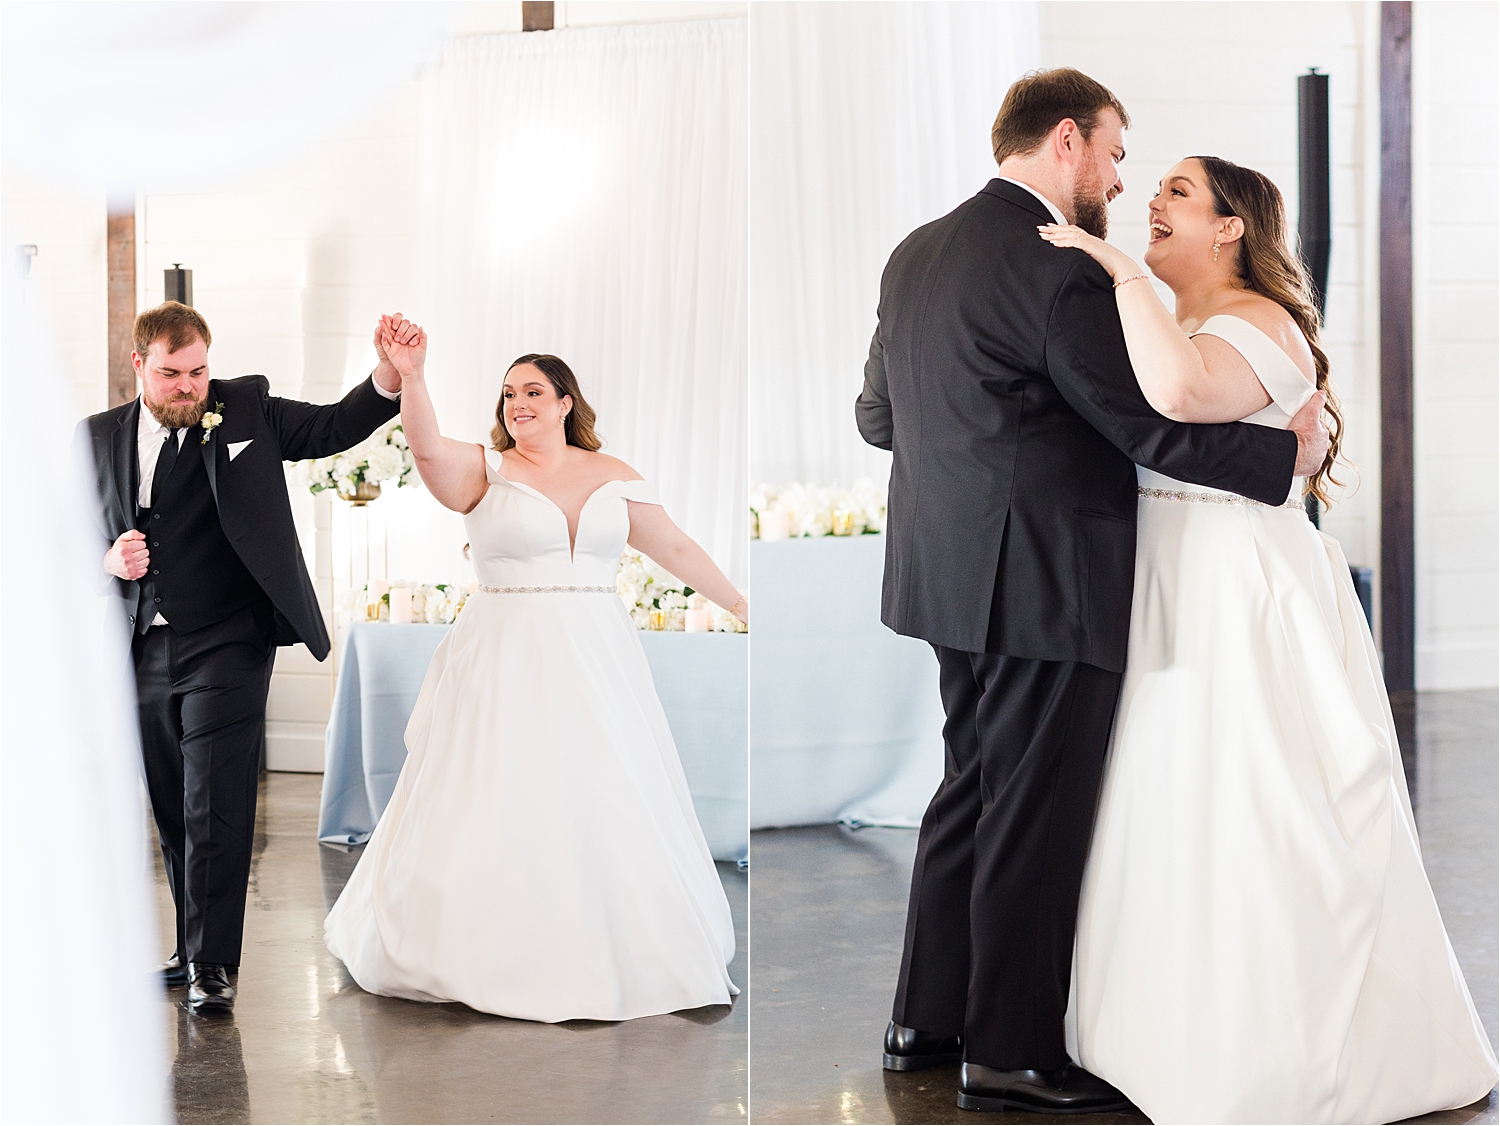 Bride and groom sharing a first dance at their wedding at Dream Point Ranch.